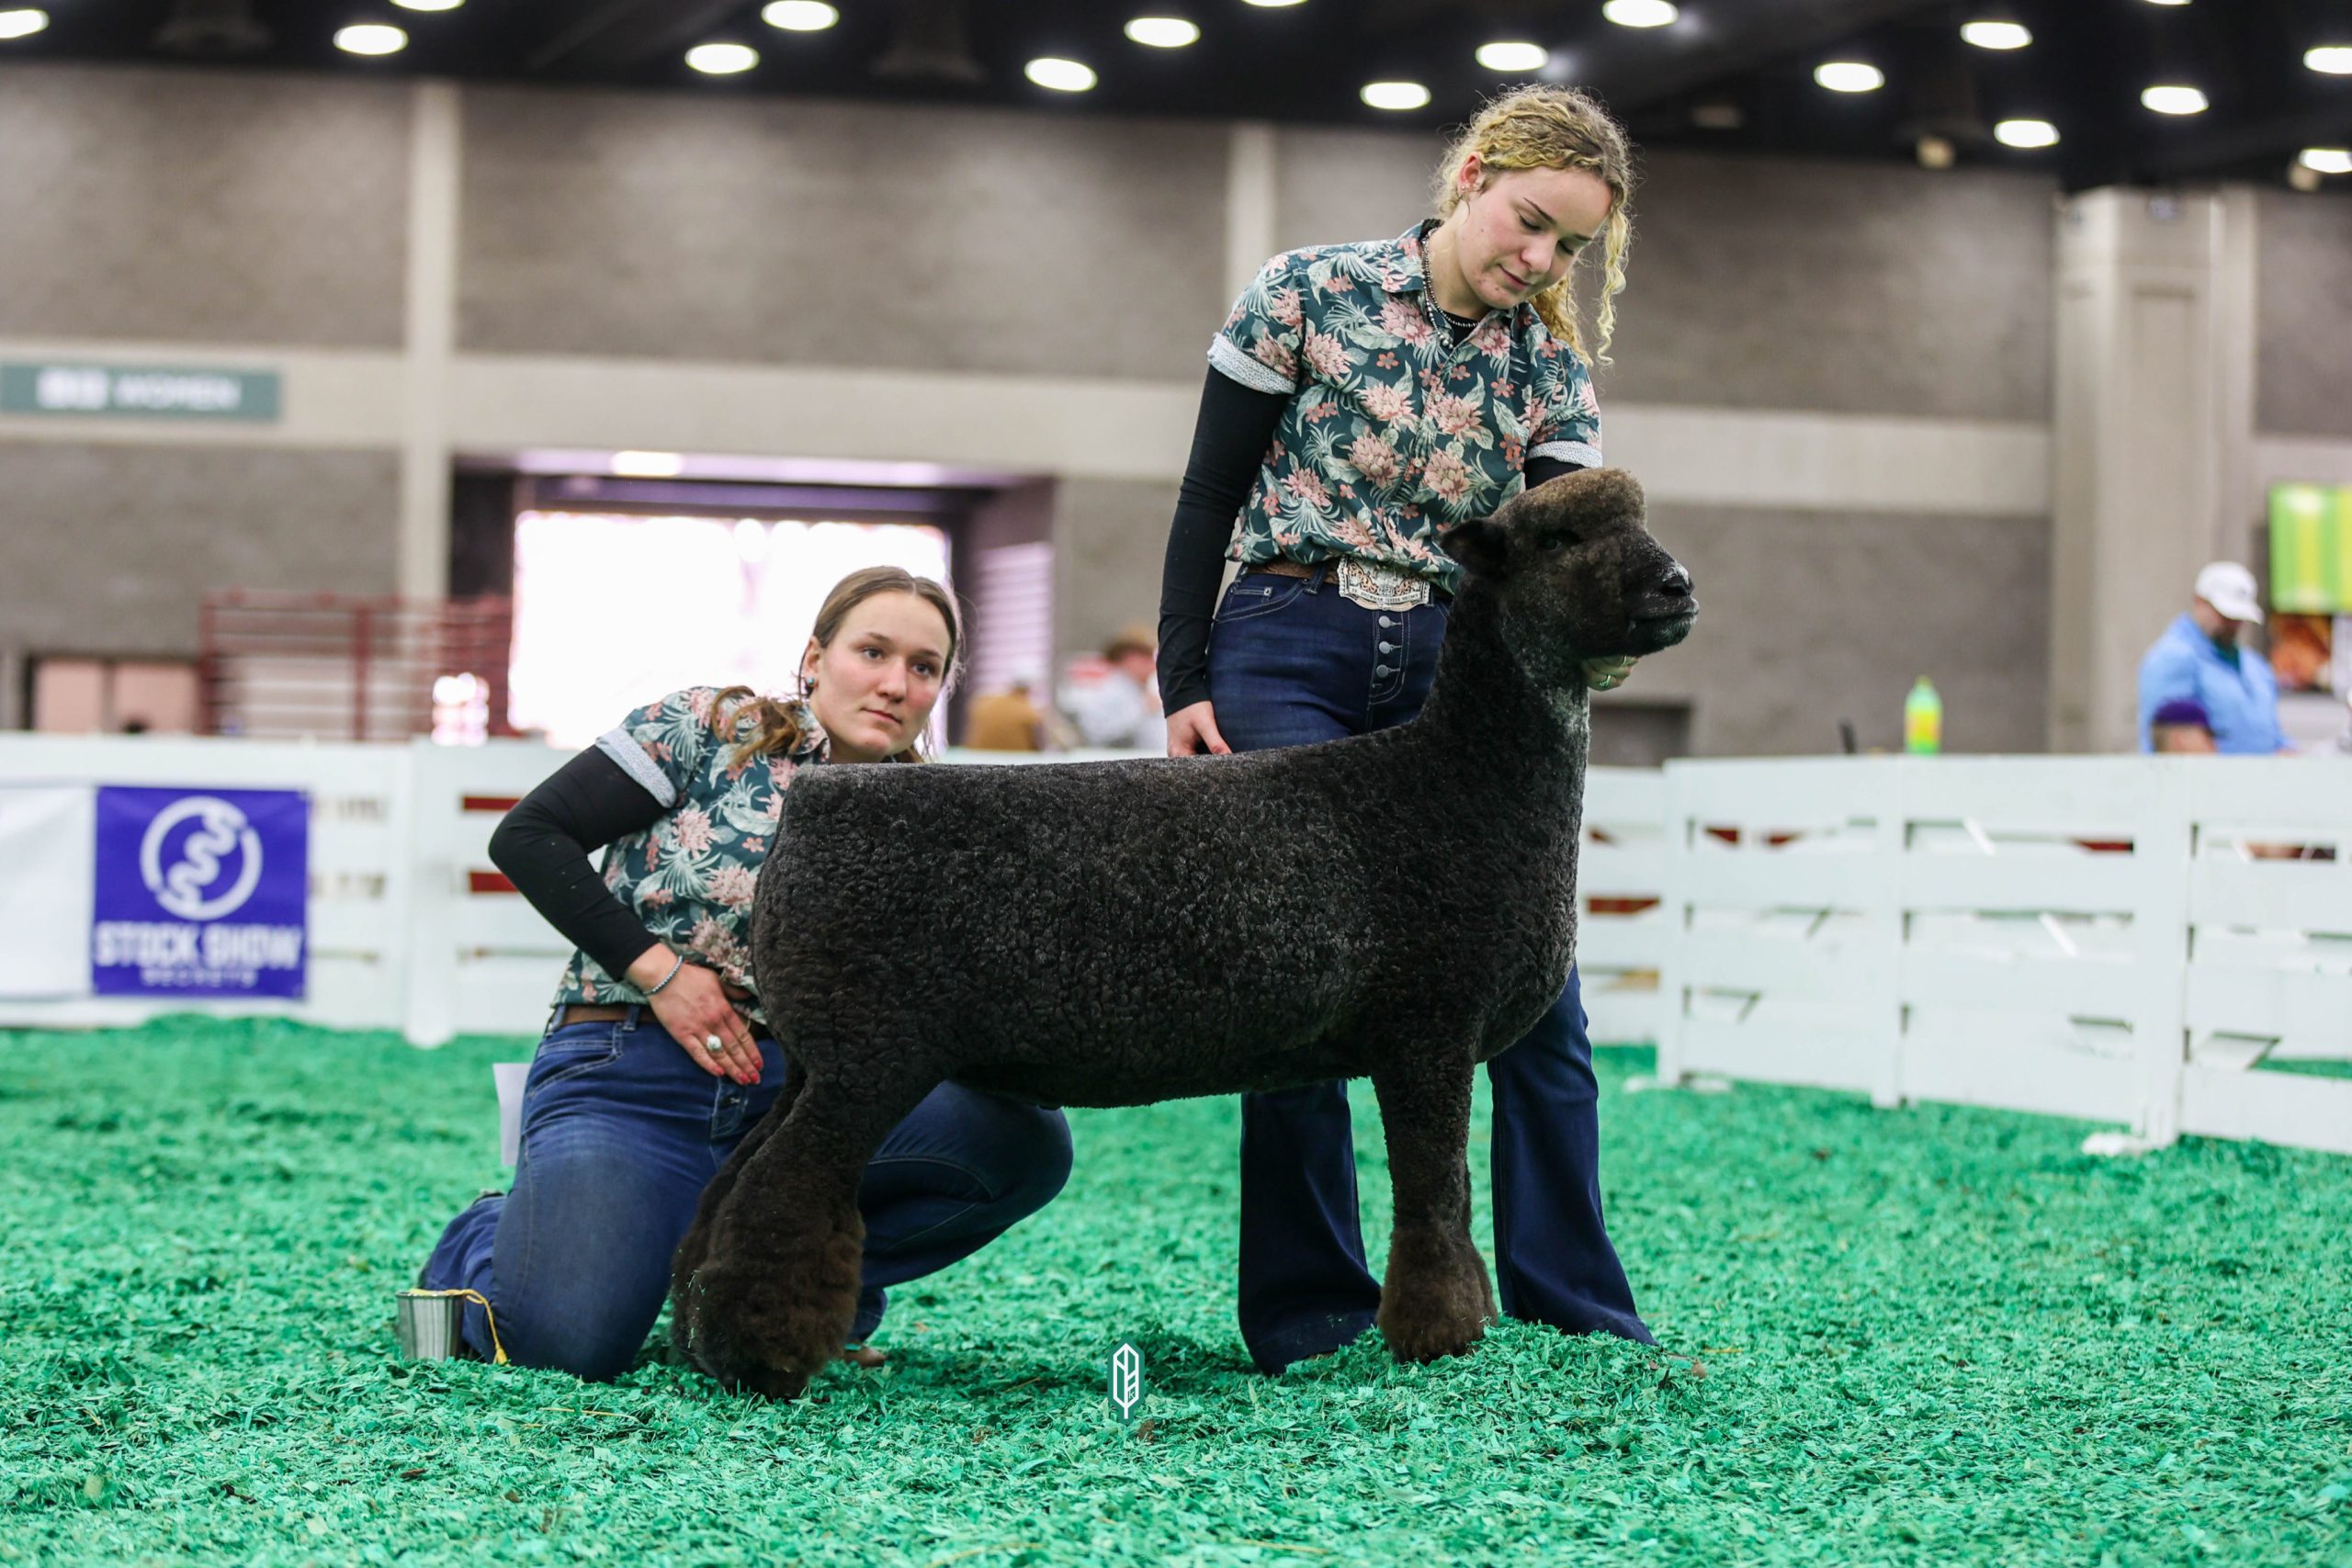 2023 National Natural Colored Romney Show at NAILE
1st place fall ewe lamb exhibited by Teresa Hromis of Winding Wicks Farm